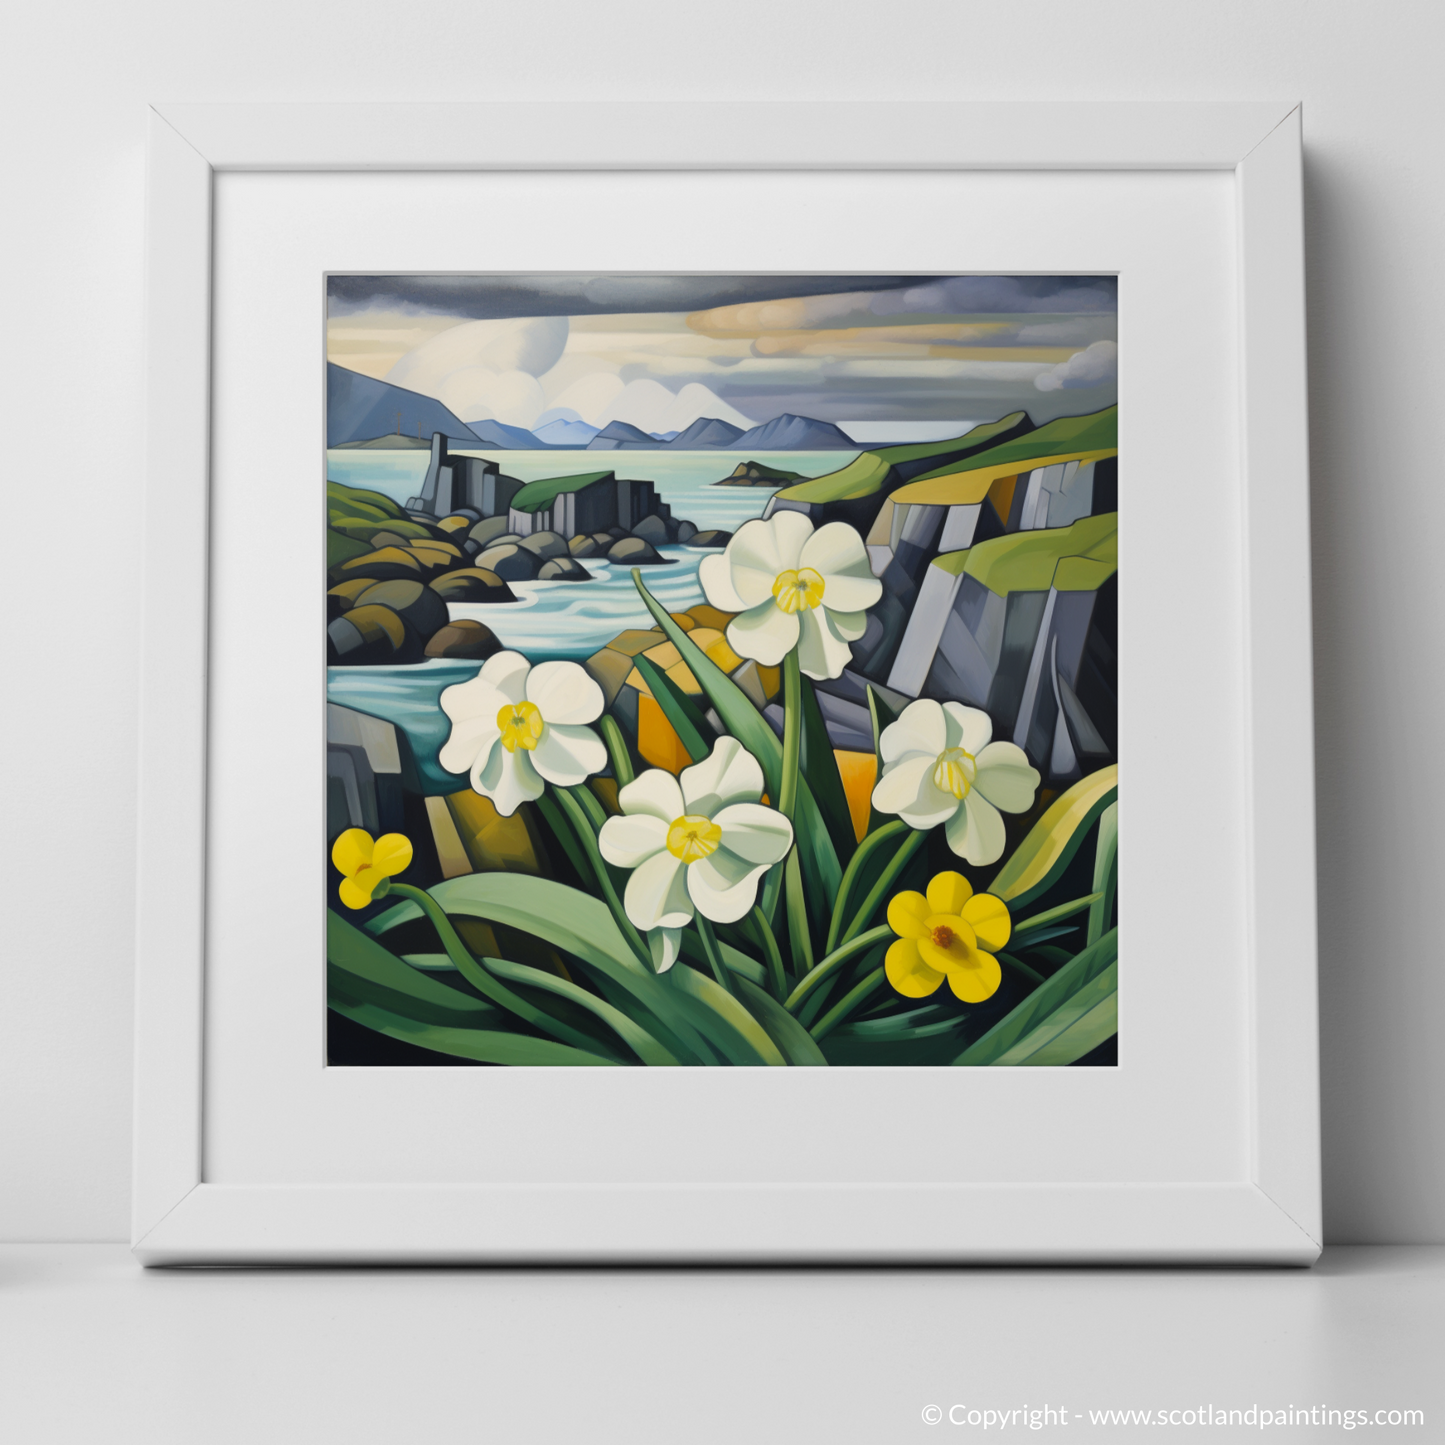 Primrose Geometry: A Cubist Ode to Argyll and Bute's Coastal Allure